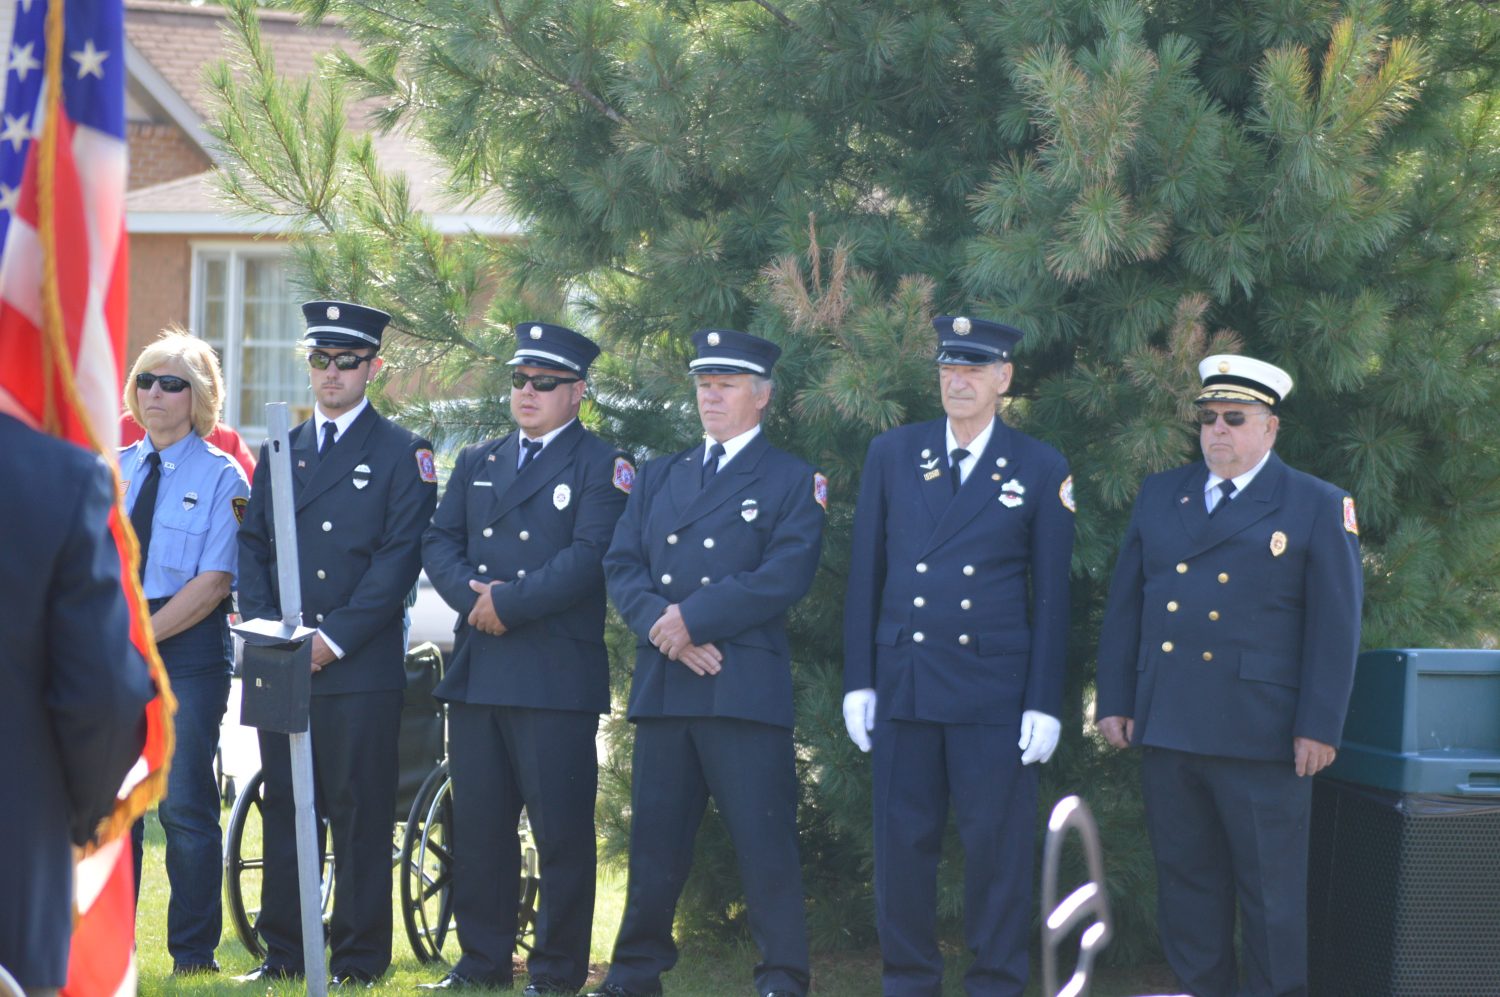 Tomahawk area emergency services hold 9/11 remembrance ceremony